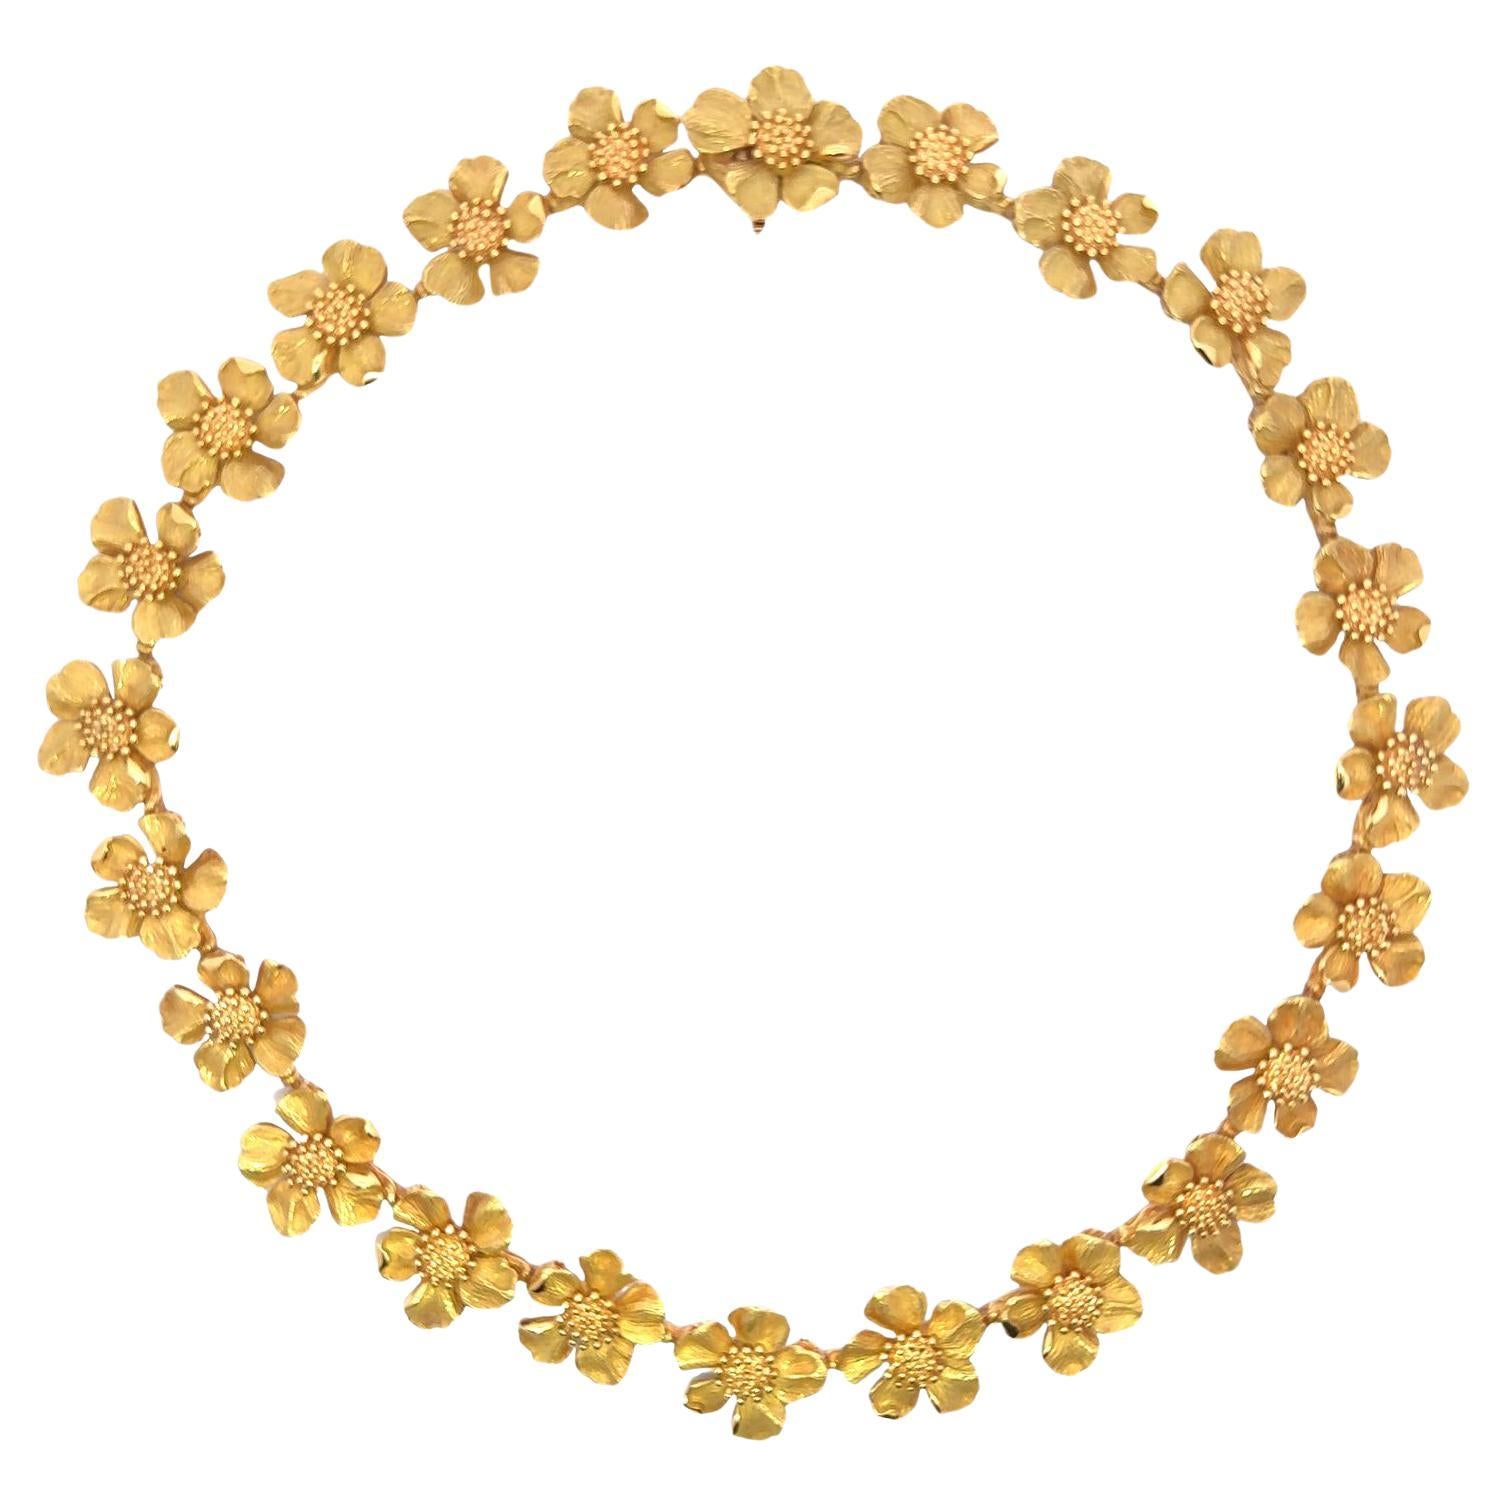 Tiffany & Company Classics Wild Rose Dogwood Flower 18KY Gold Vintage Necklace. For Sale